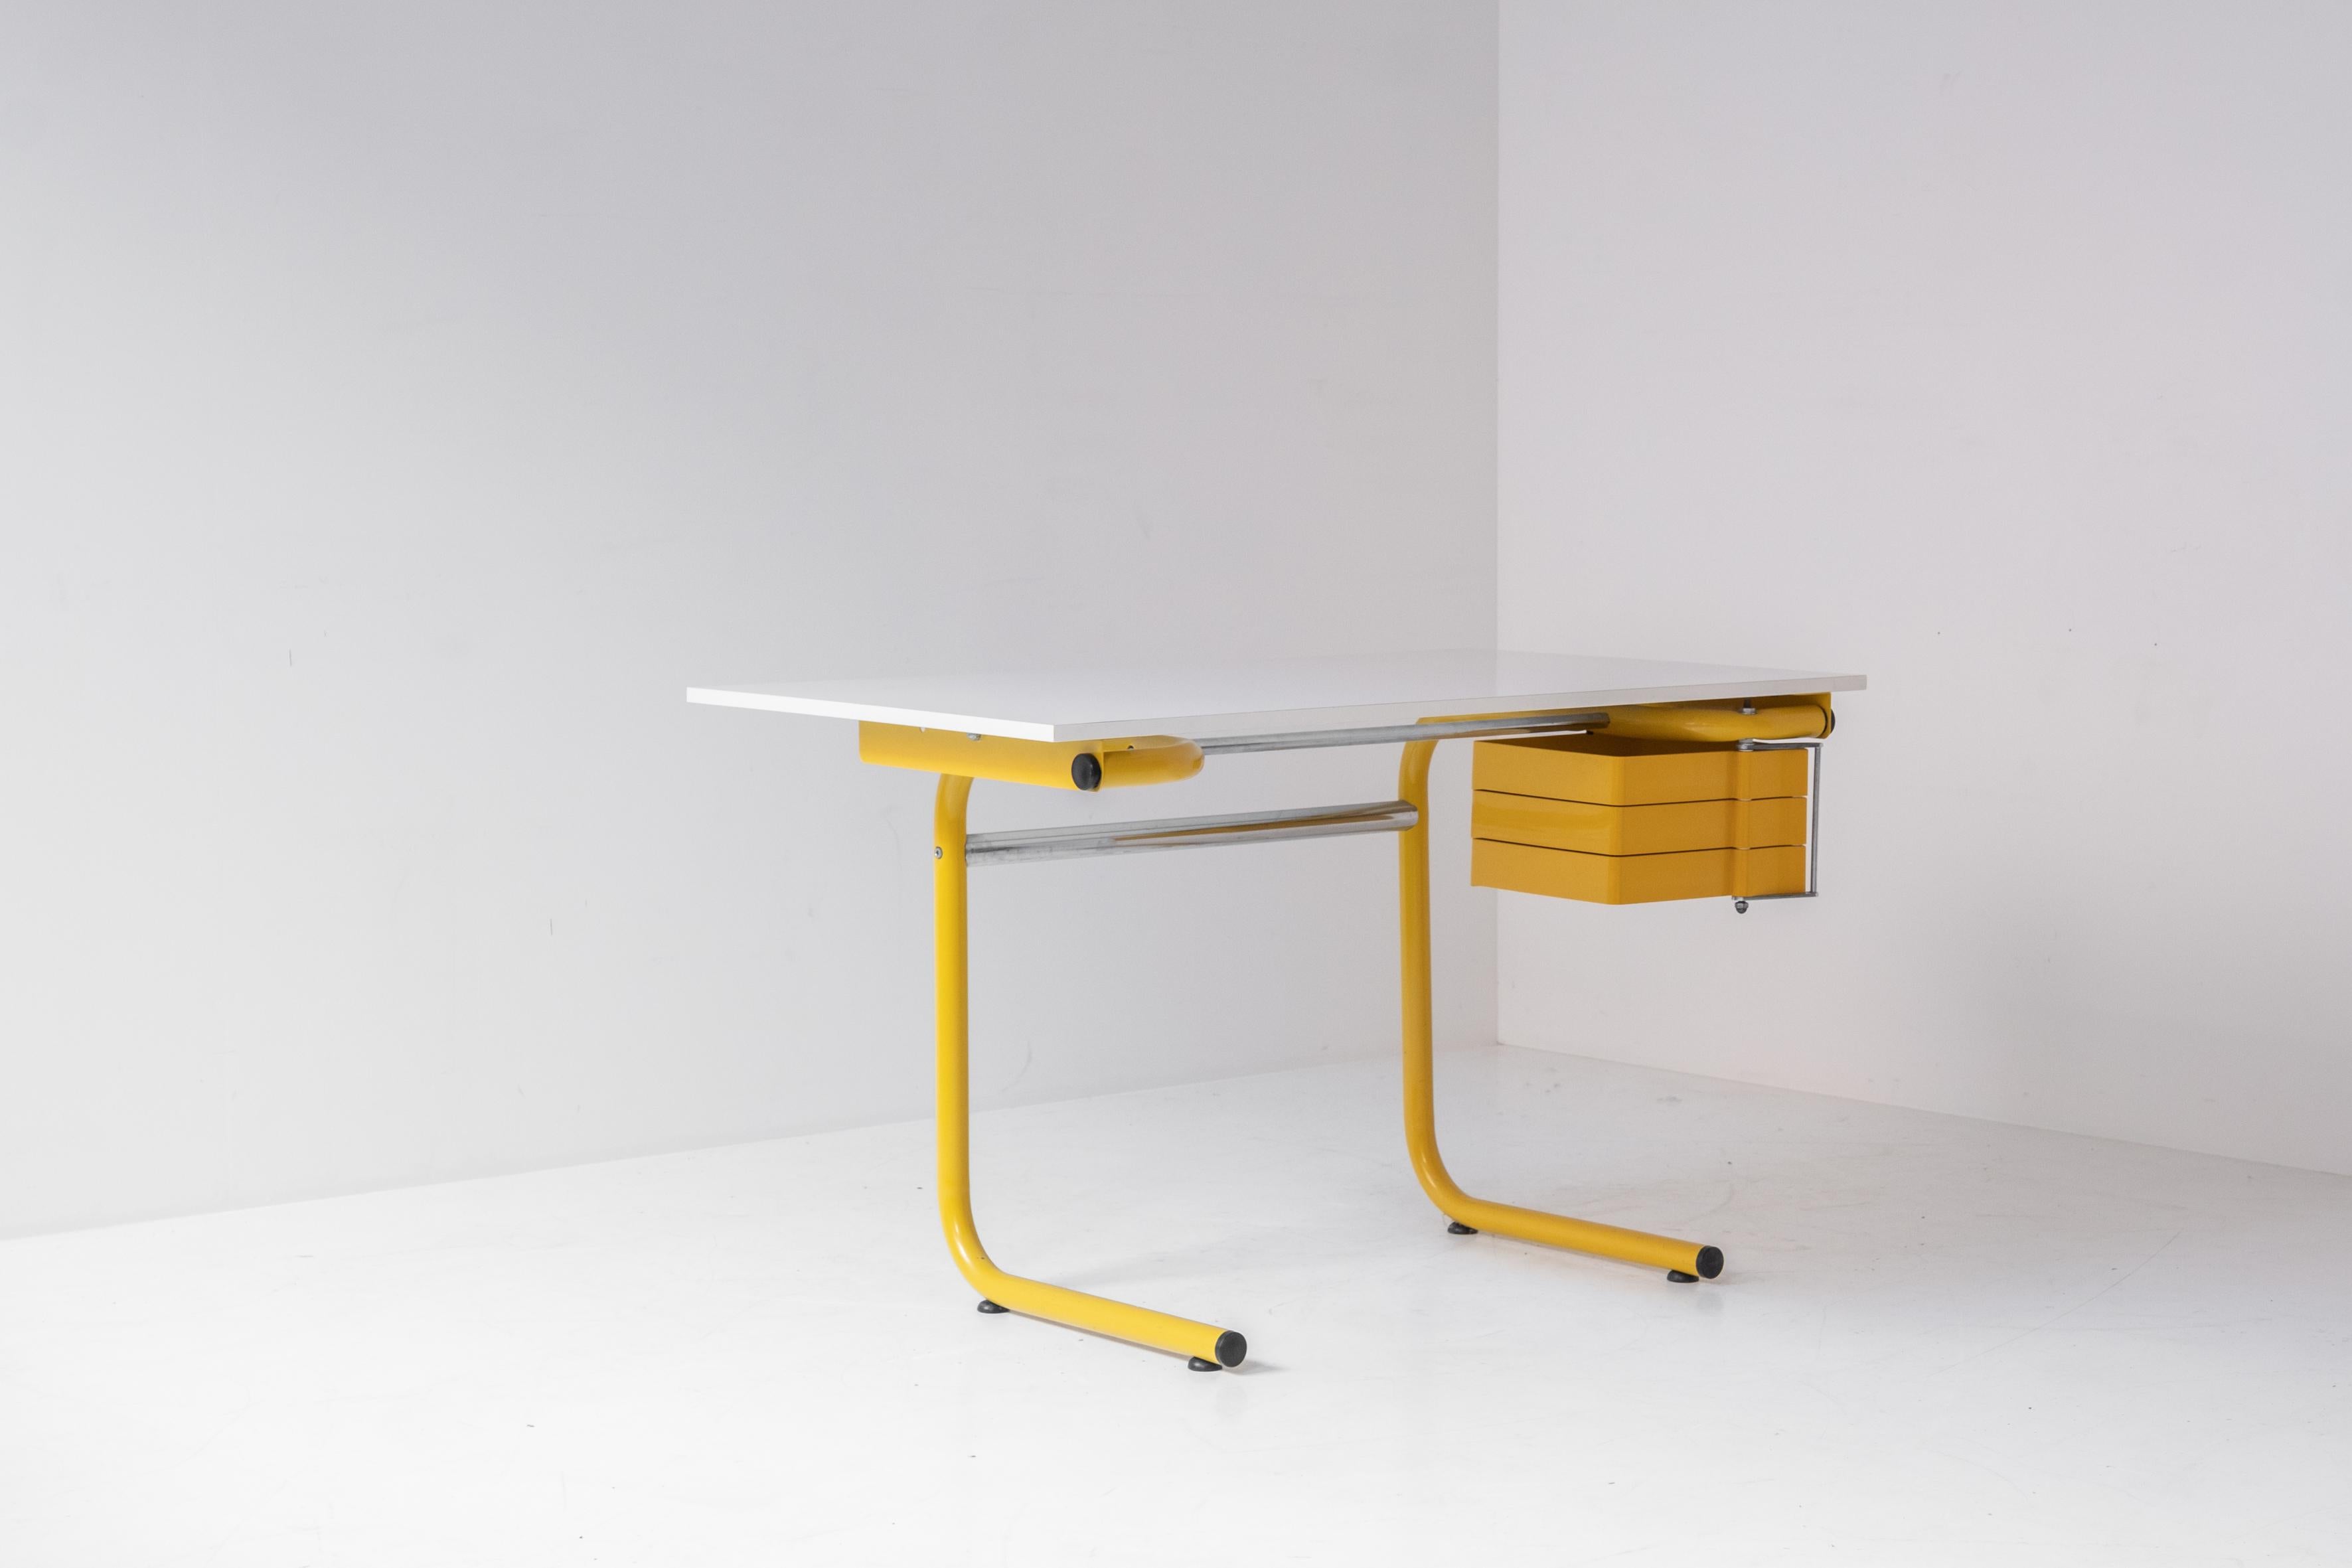 Desk or drafting table by Joe Colombo for Bieffeplast, Italy, 1970s. This desk is in a very good and well presented original condition. This table can be set up in multiple positions. Labeled. Here in combination with a desk chair by Jørgen